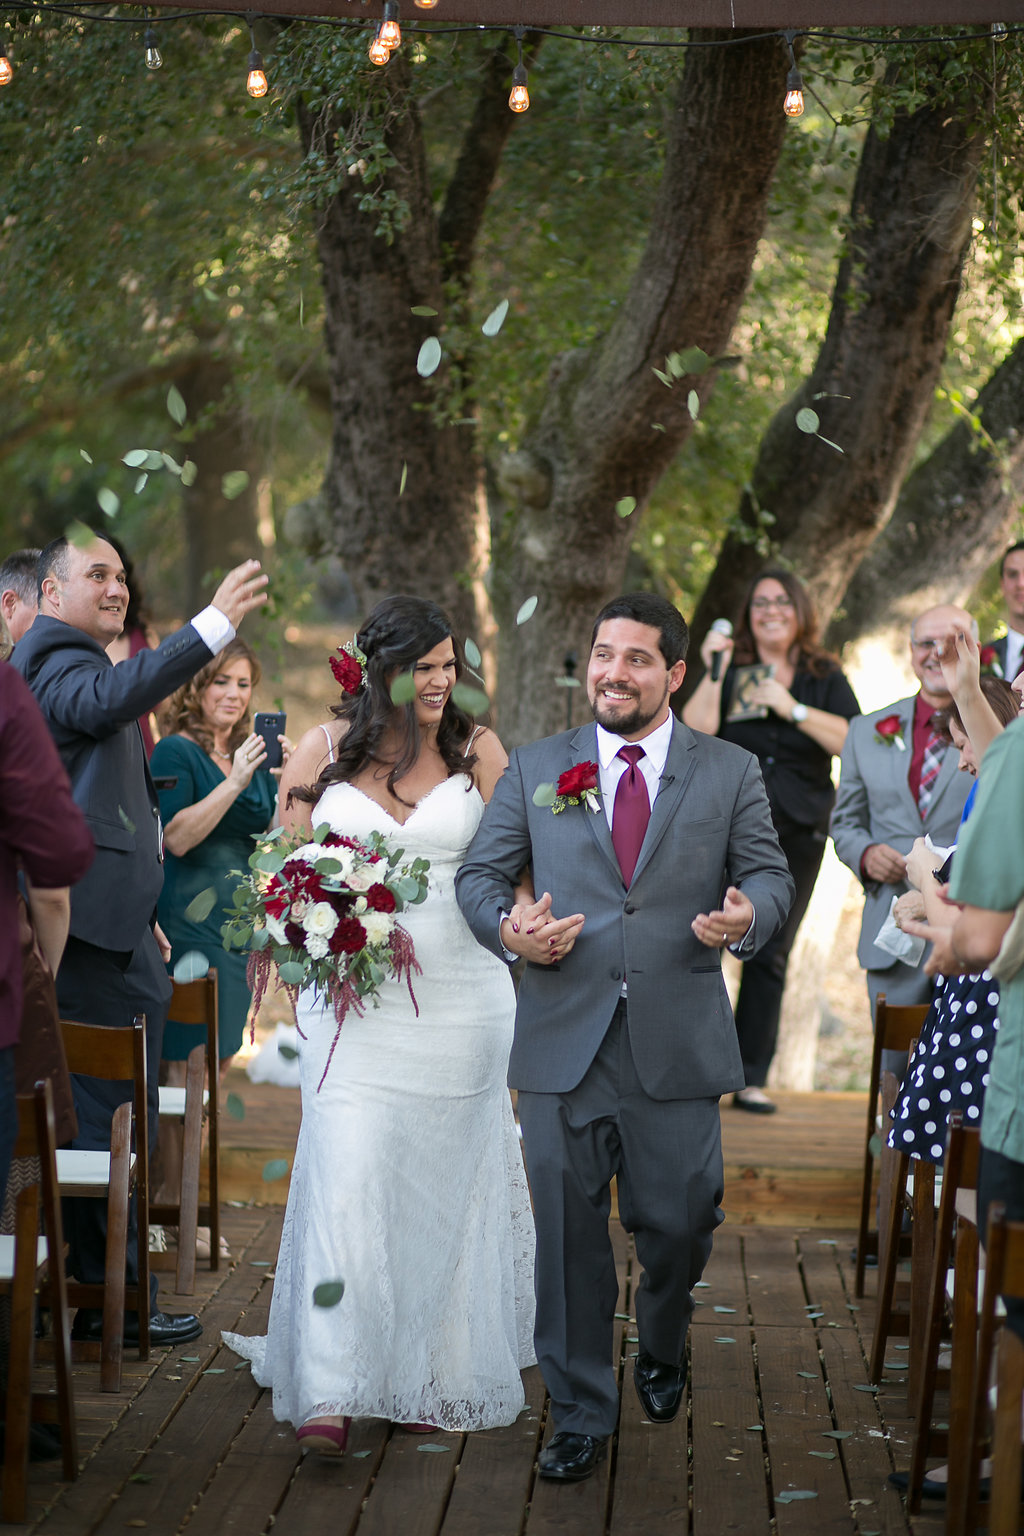 Romantic wedding at Highland Oaks Ranch by Murrieta wedding officiant Let's Get Married by Marie